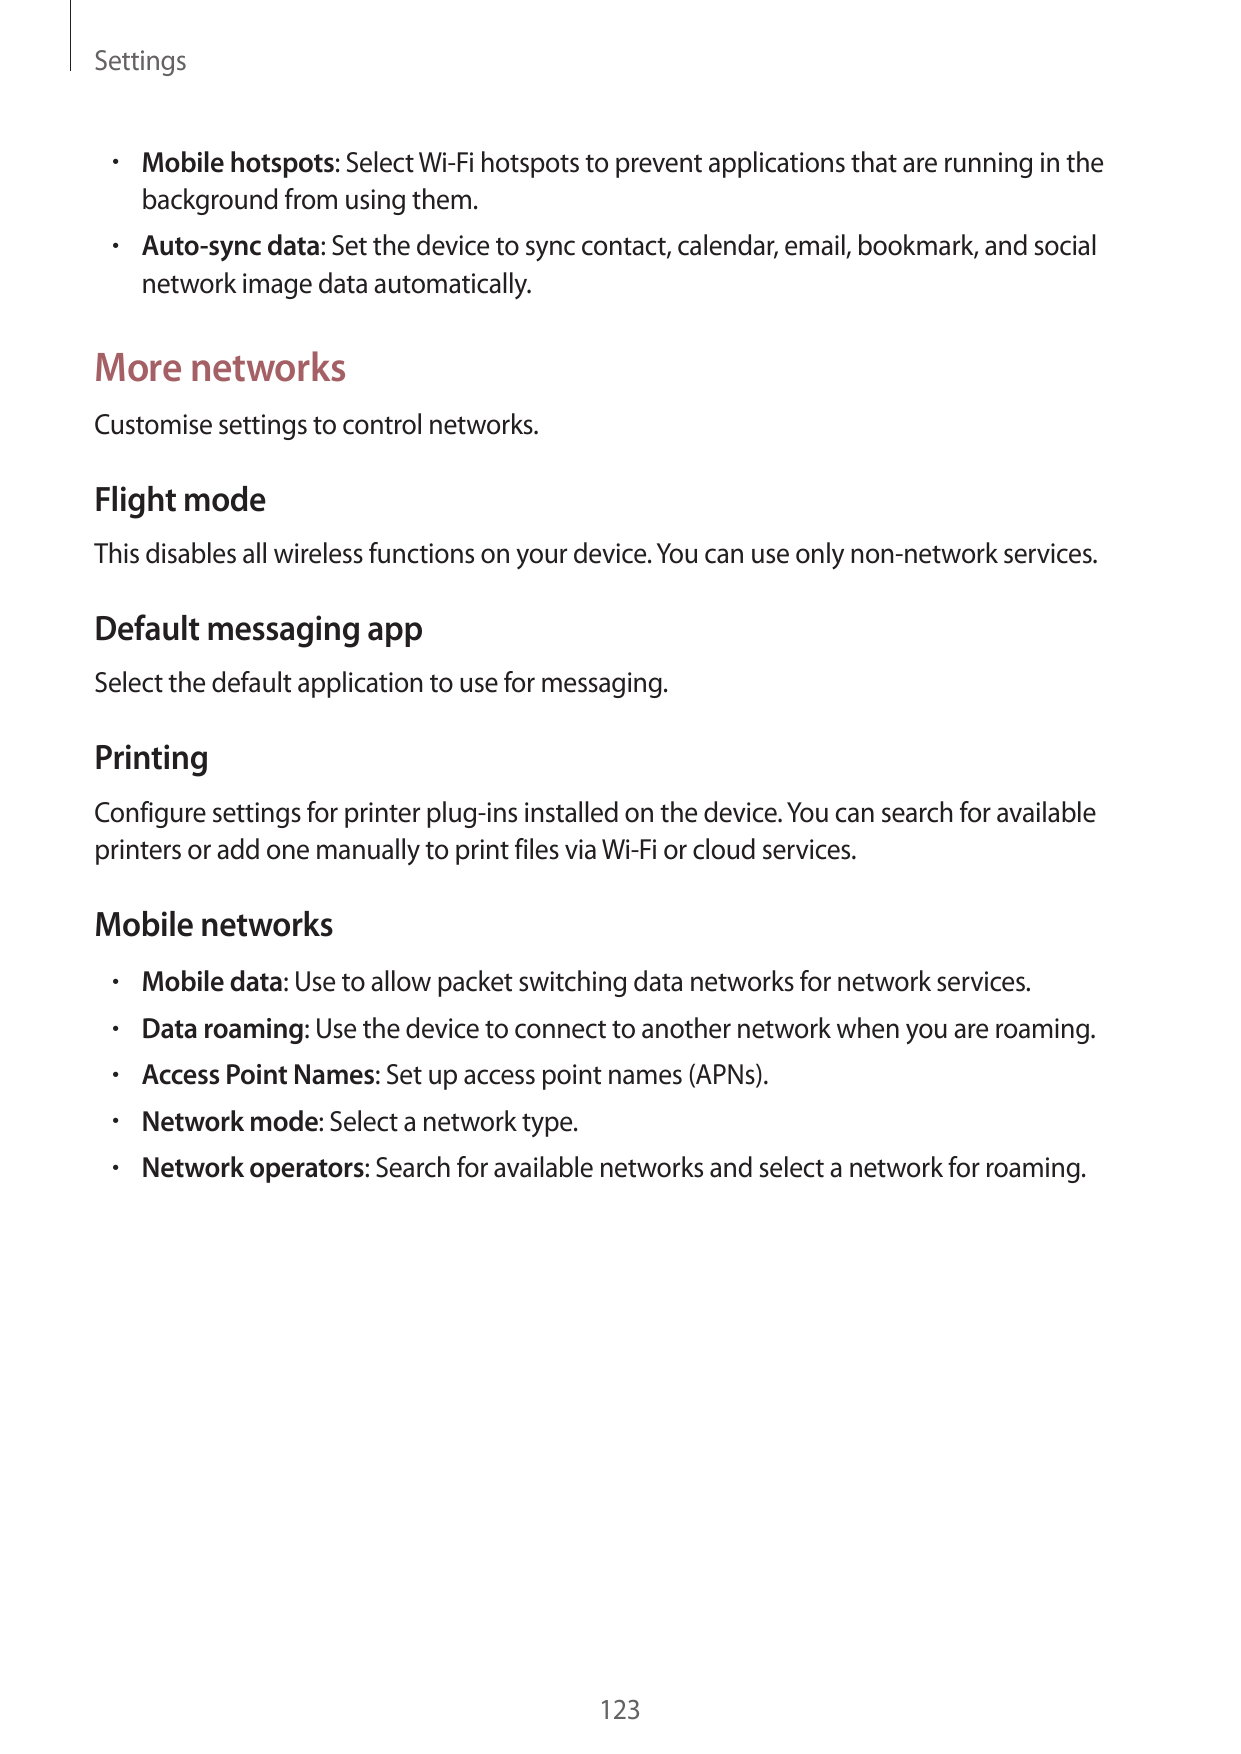 Settings• Mobile hotspots: Select Wi-Fi hotspots to prevent applications that are running in thebackground from using them.• Aut